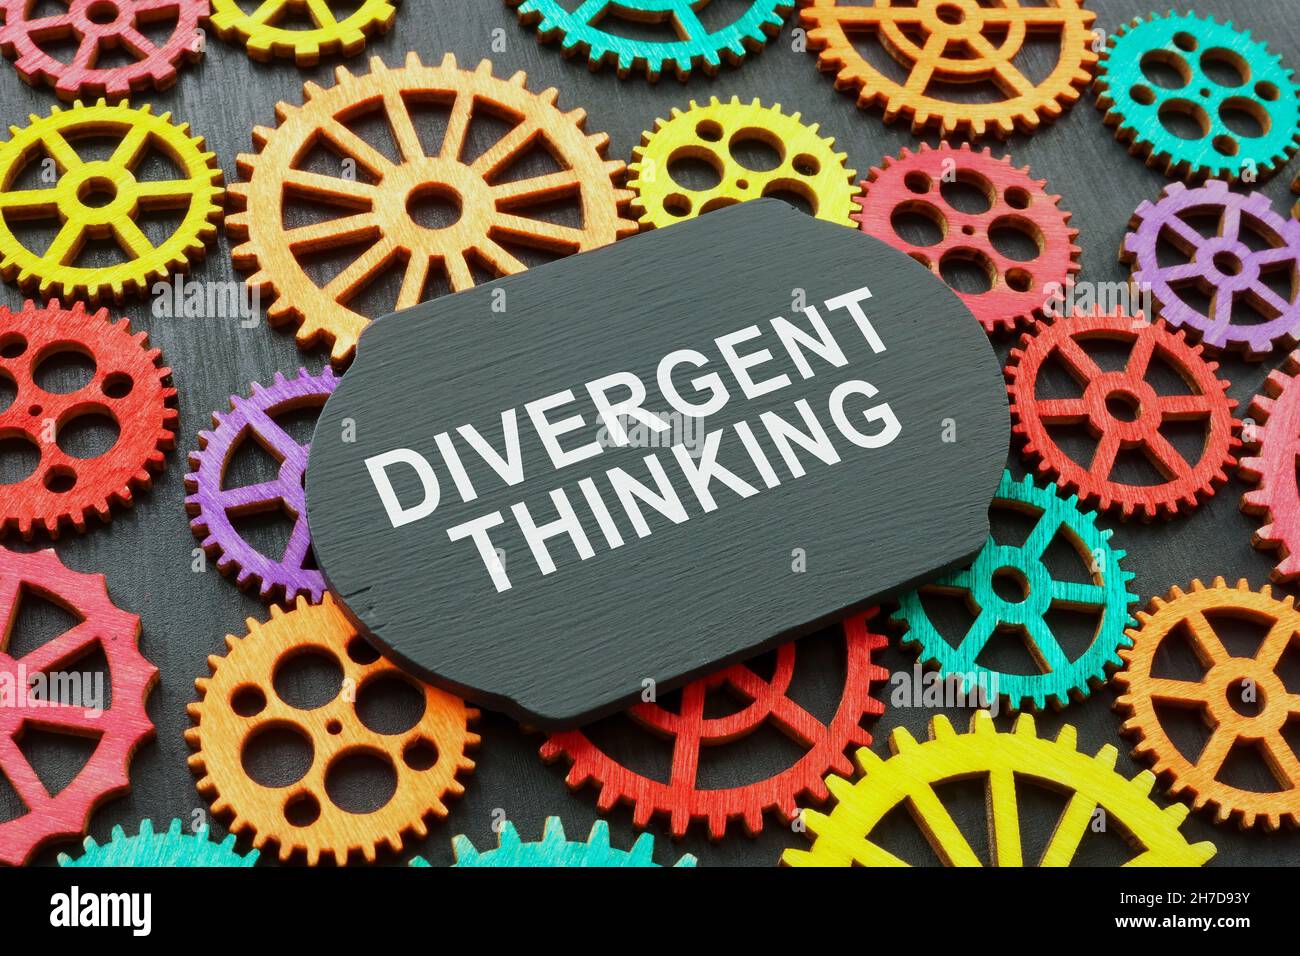 Divergent thinking words on the board and gear wheels. Stock Photo